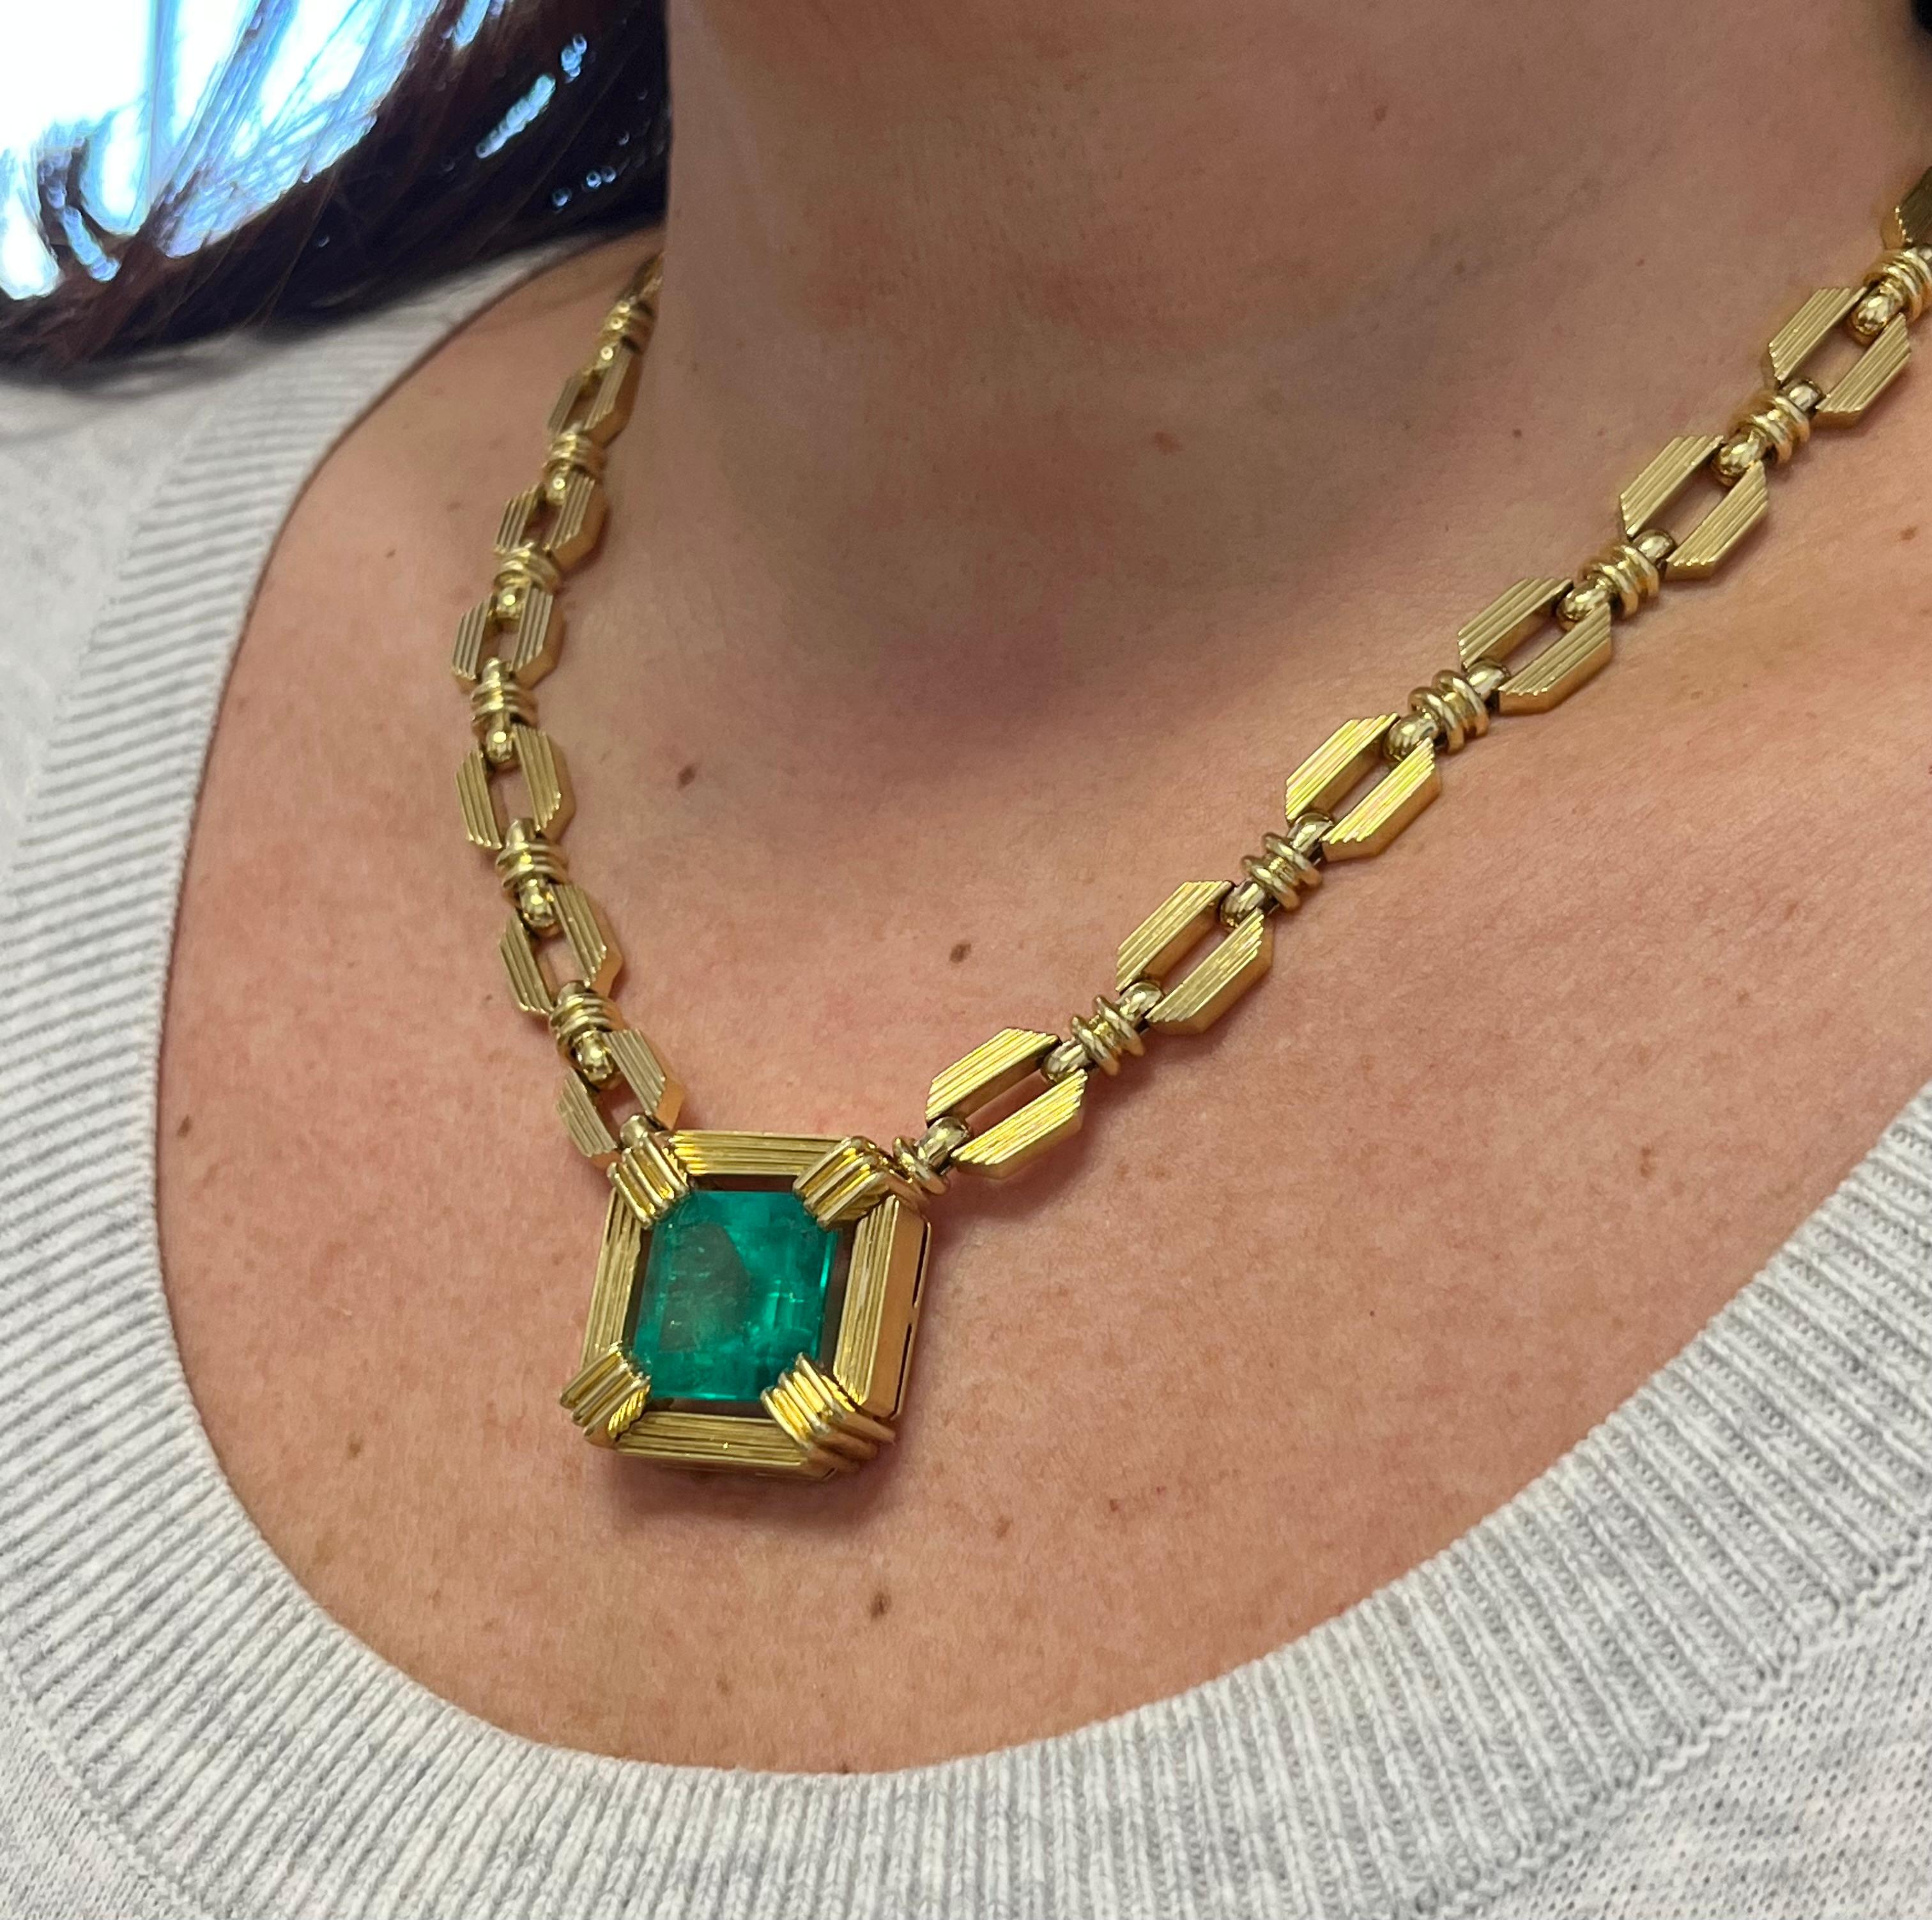 Henry Dunay Signed 19.48 Carat Colombian Emerald Necklace in 18k Yellow Gold For Sale 4